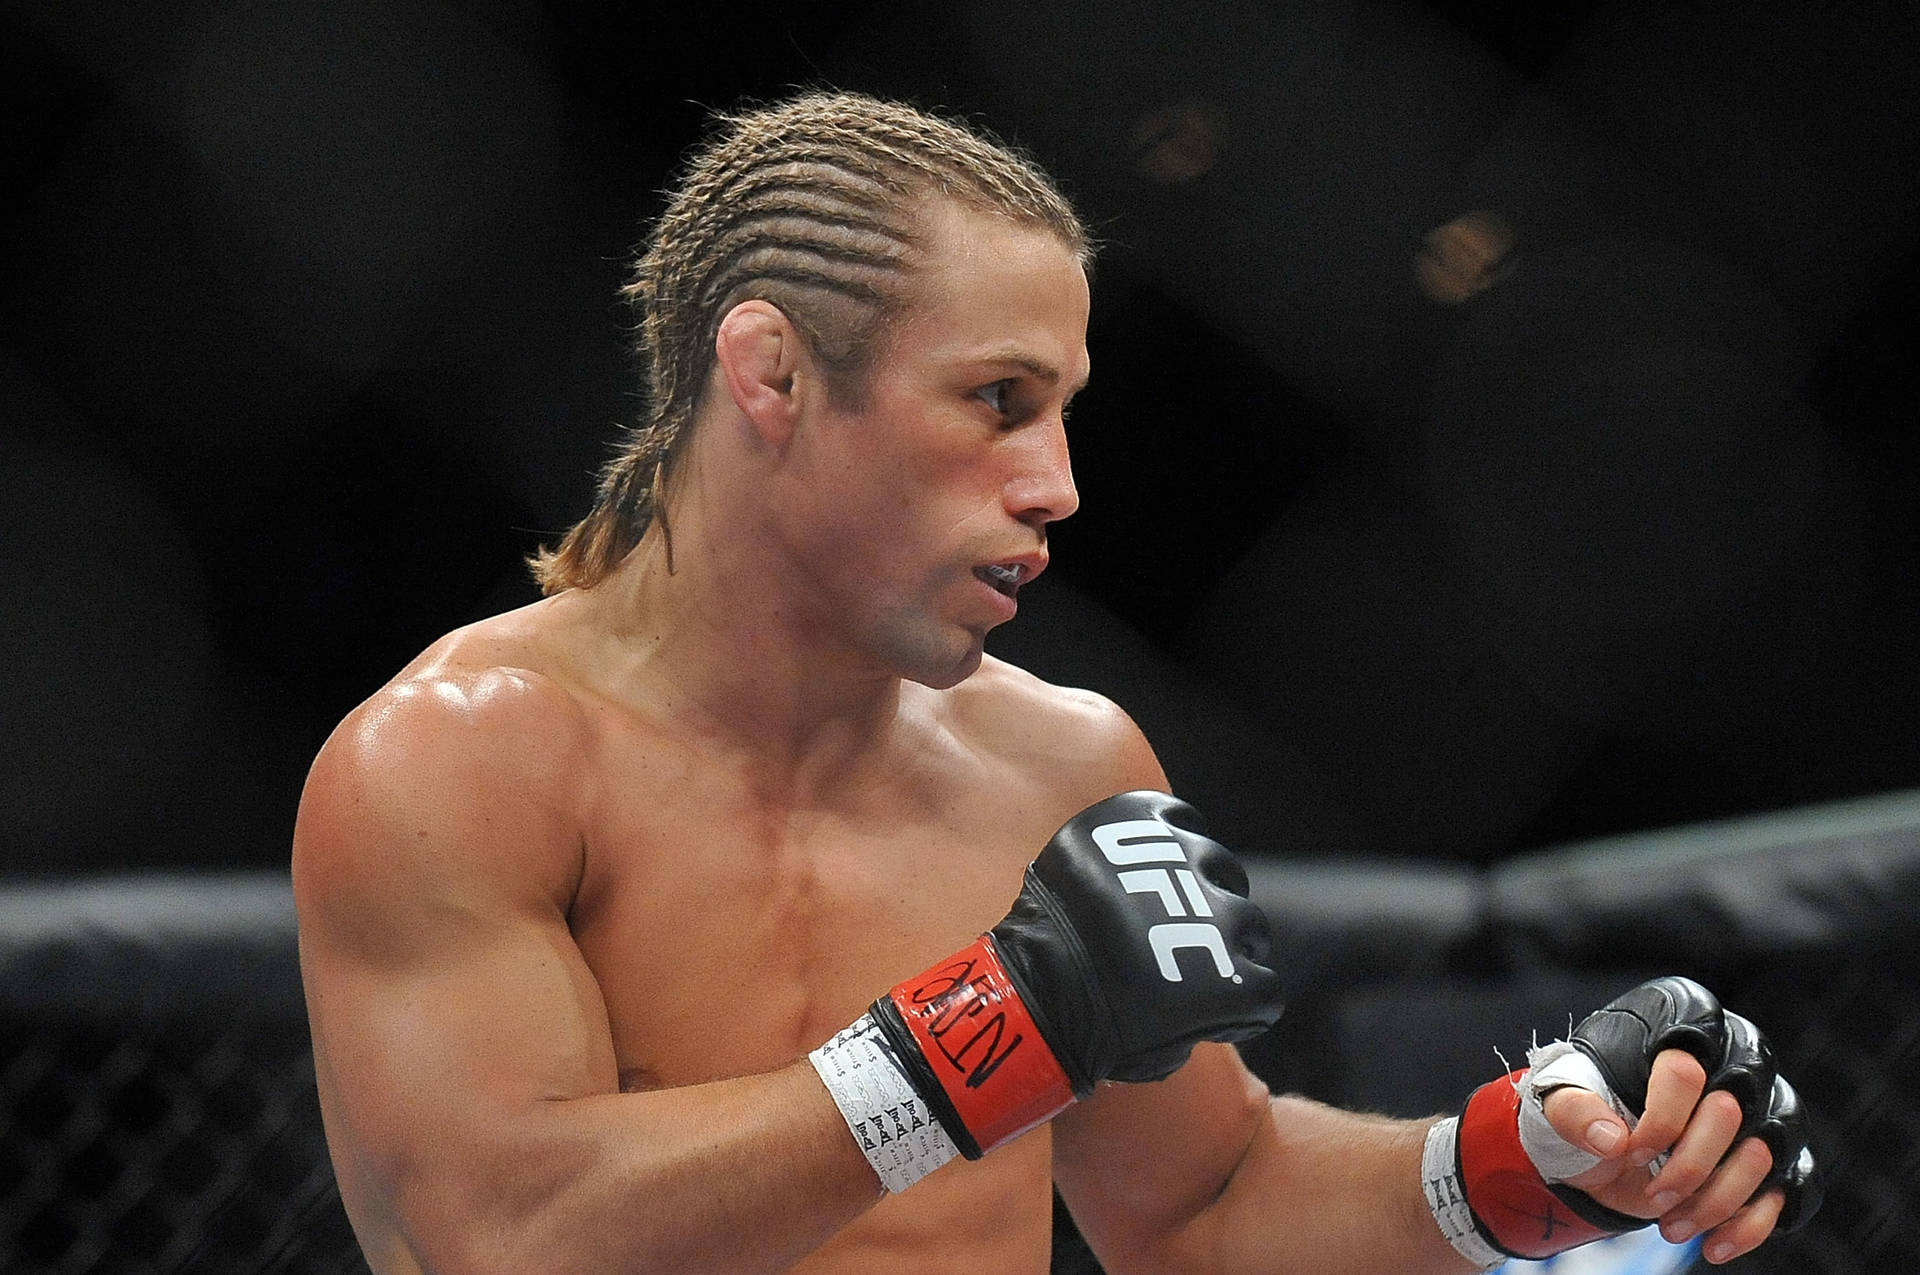 Download Urijah Faber Ready To Fight Wallpaper | Wallpapers.com